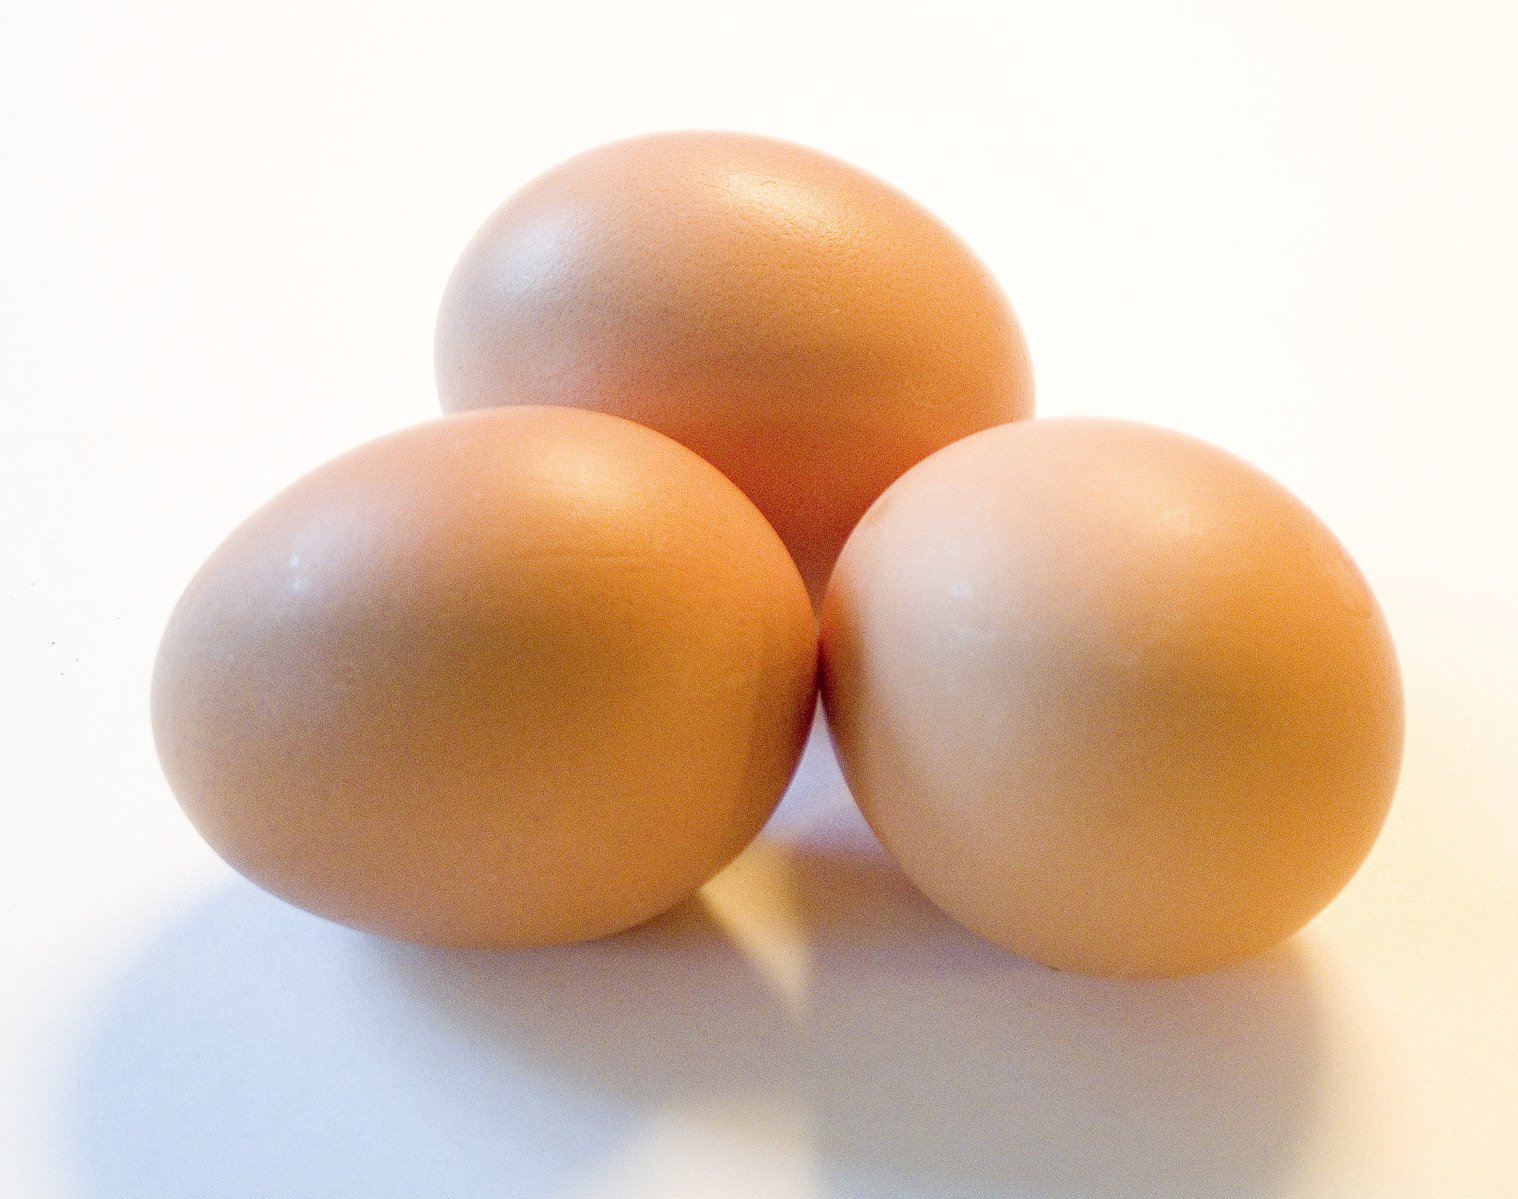 three eggs on white background with one yellow and one brown